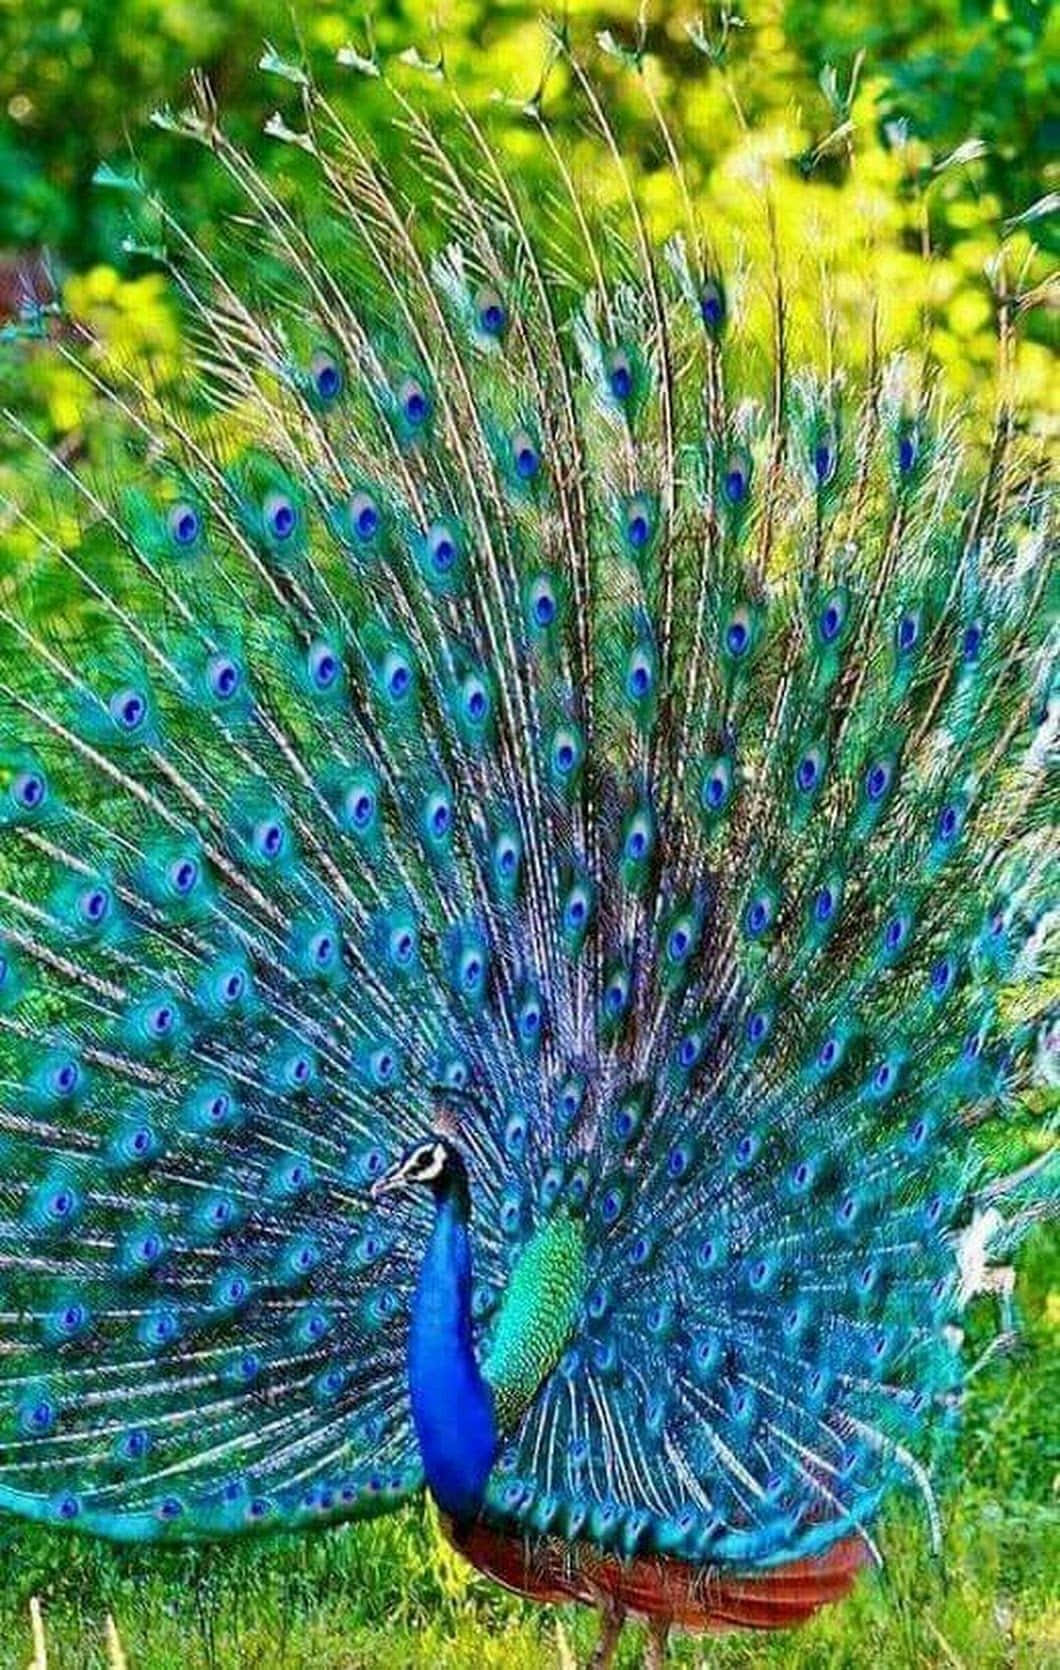 A graceful peacock, displaying its magnificent plumes.